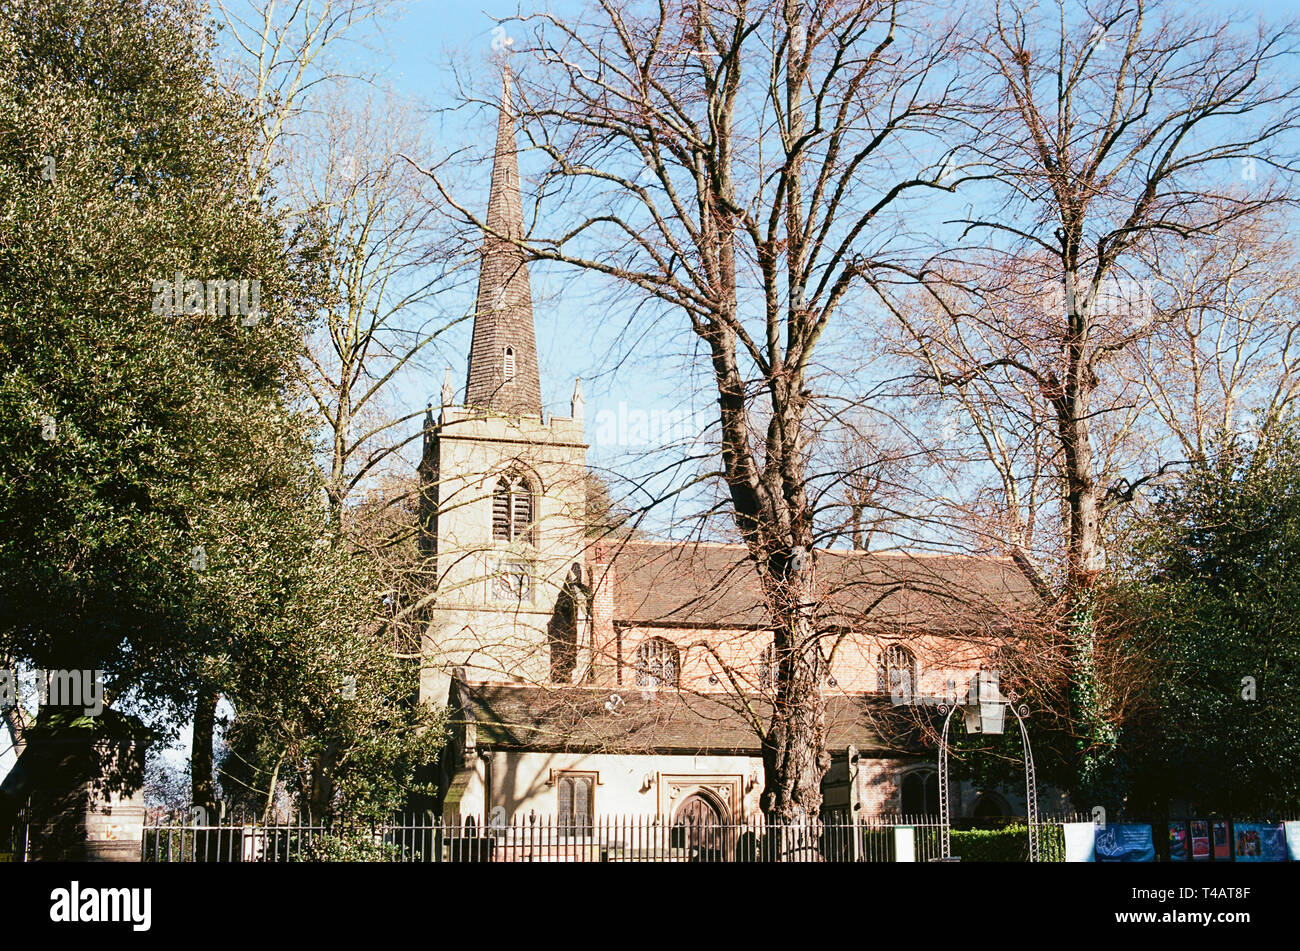 St Mary's Old Church, Stoke Newington, North London UK, from Church Street, in the London Borough of Hackney Stock Photo